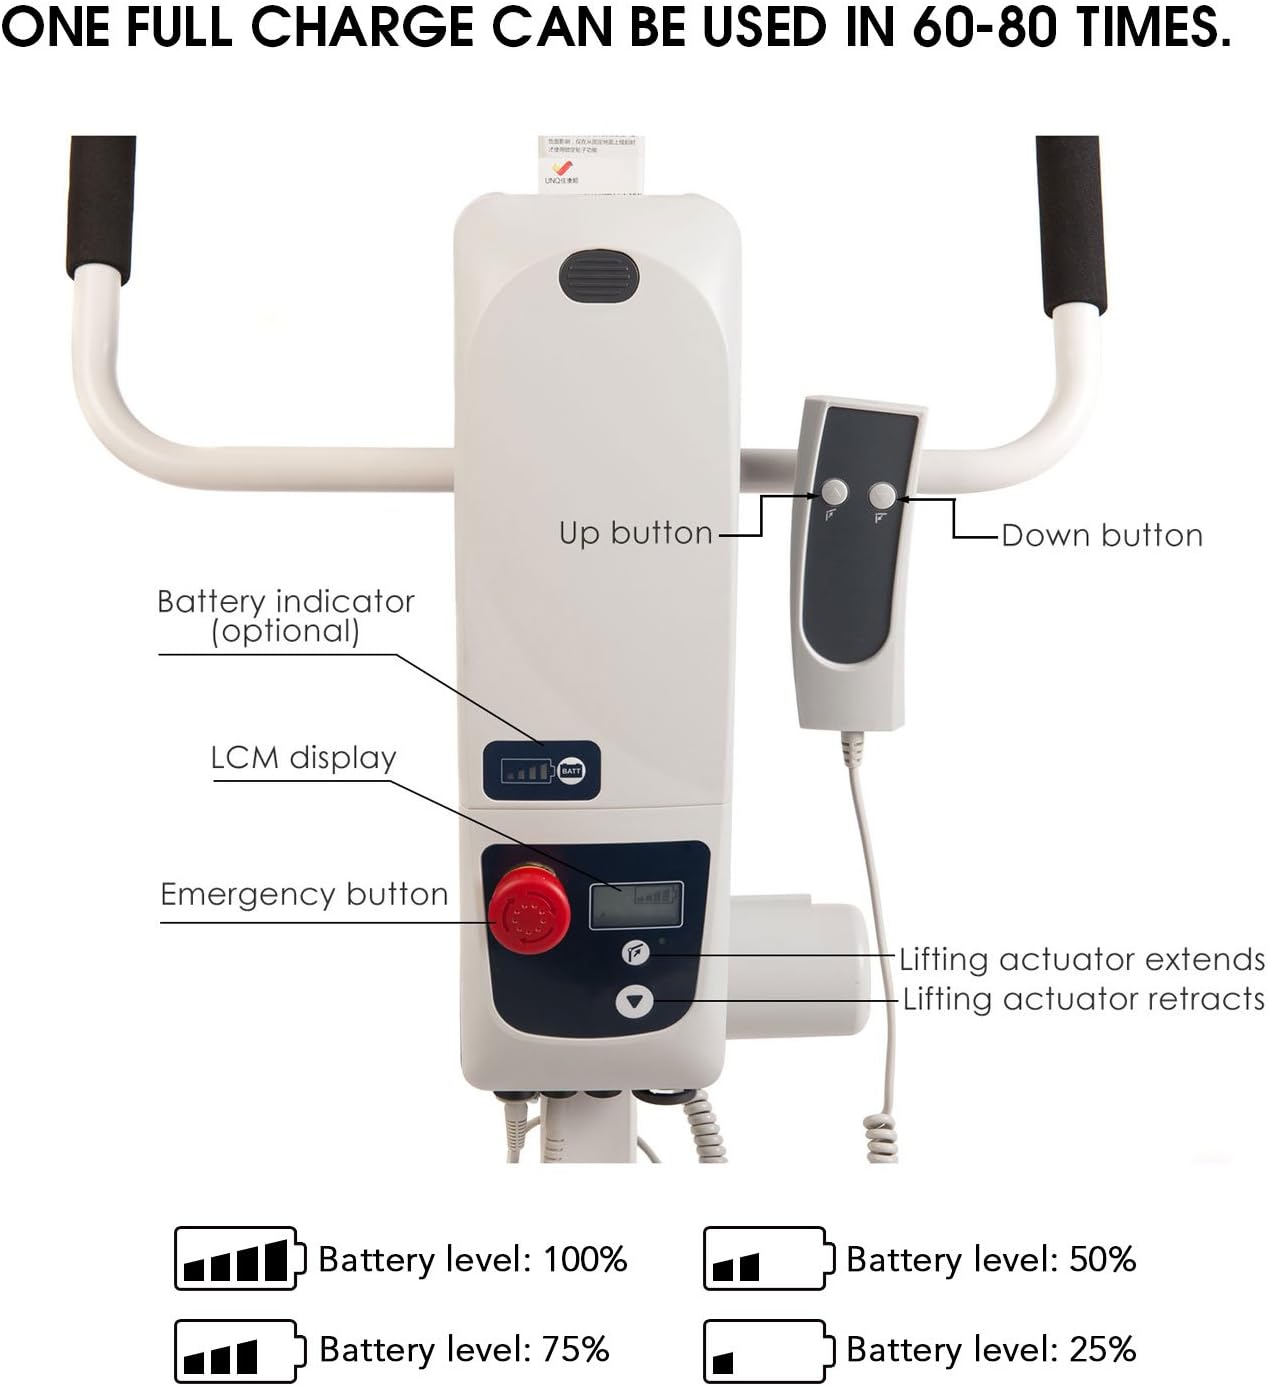 Hi-Fortune Patient Lift Electric Unfoldable Hydraulic Body Transfer for Home Use - $650